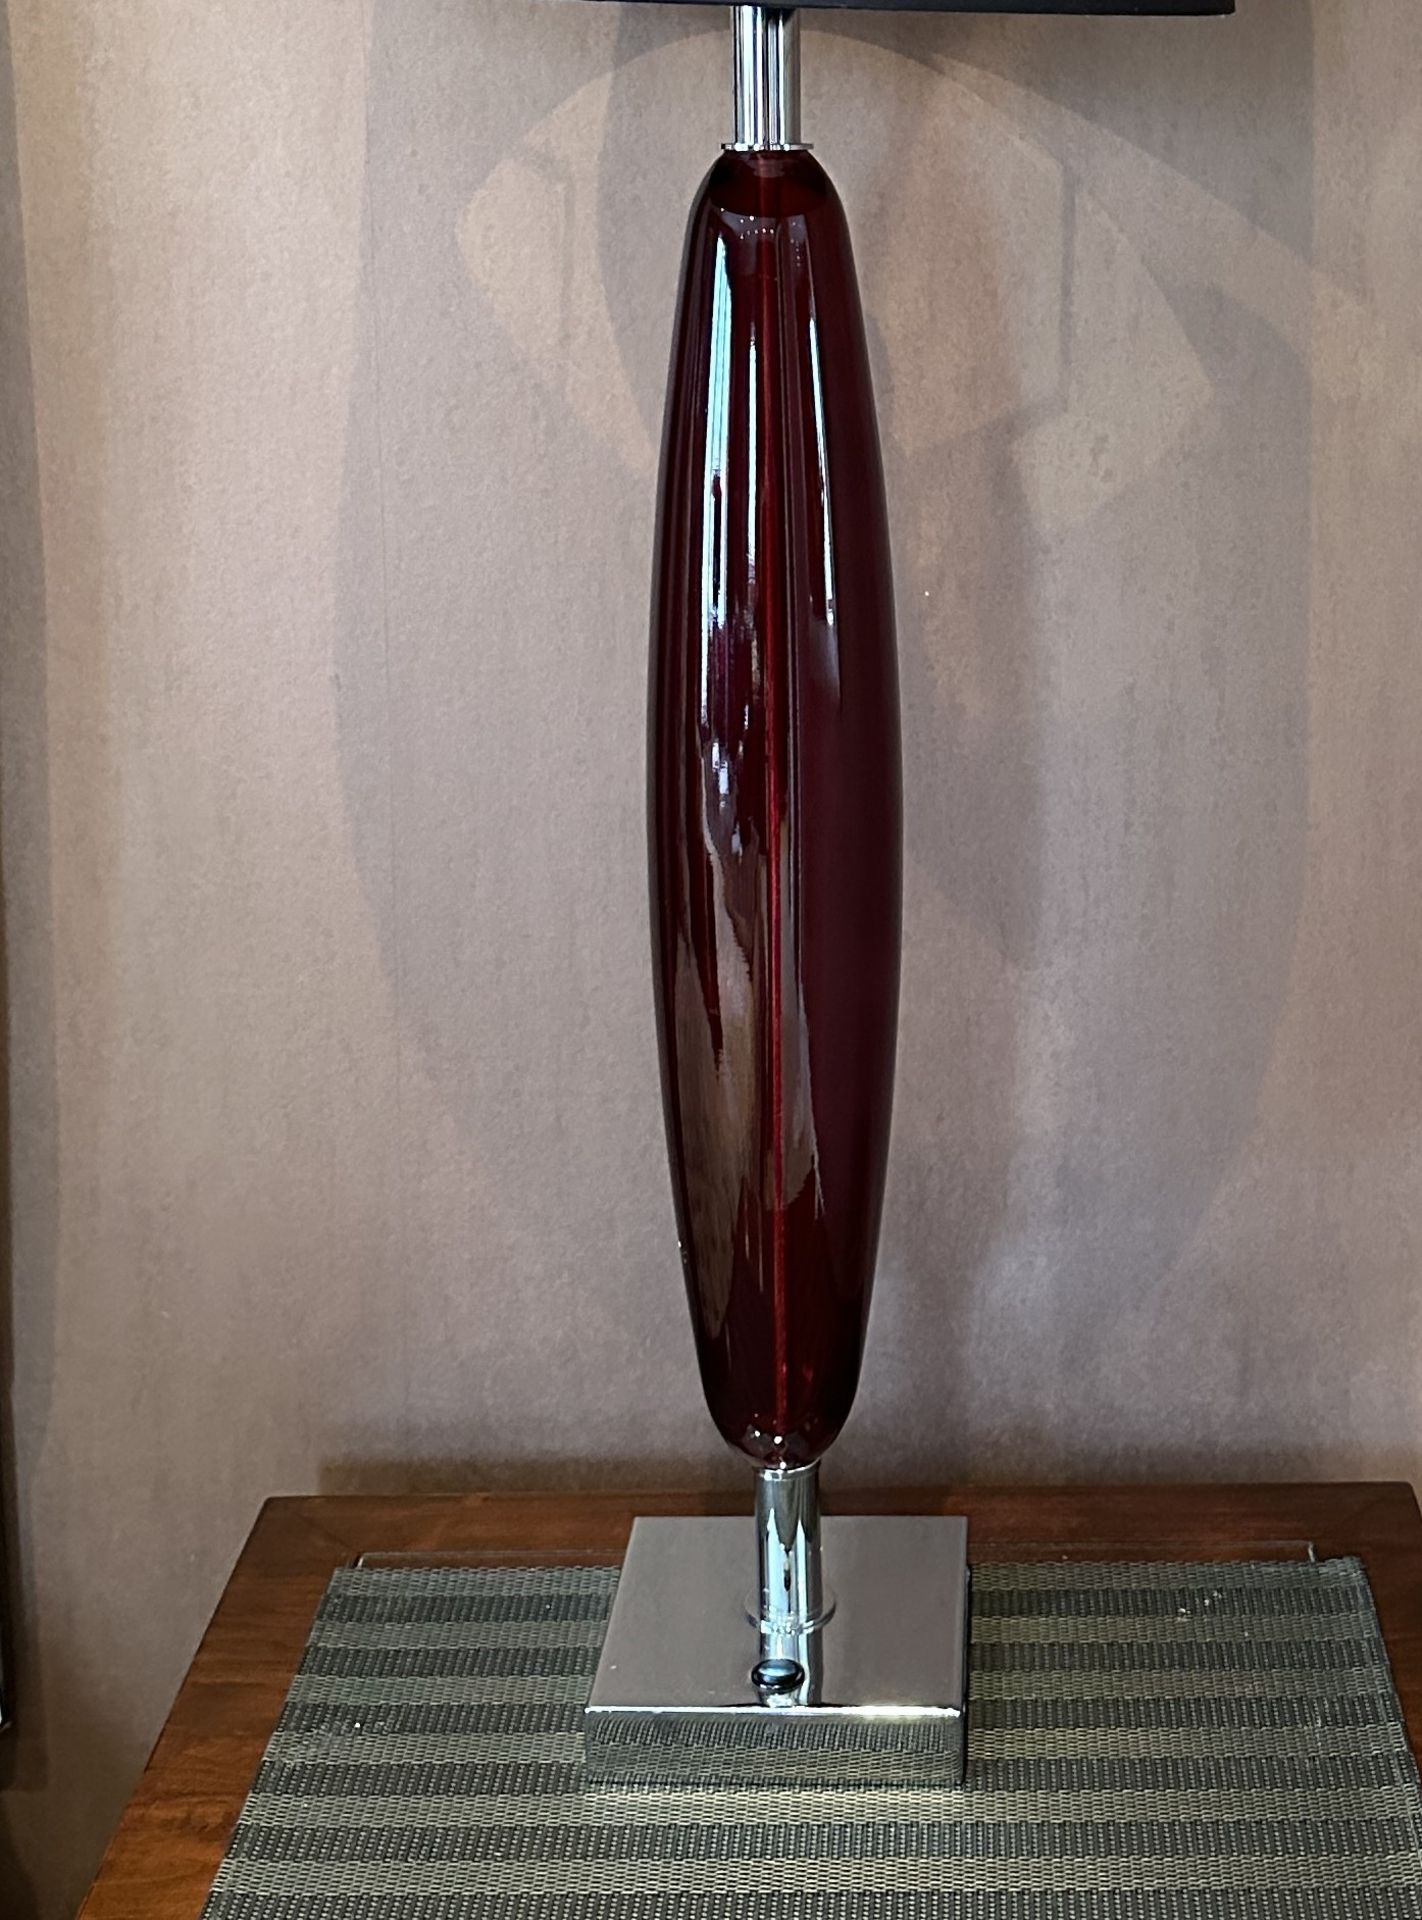 2 x Dark Red Glass Lamps With Black Shades And Silver Metal Base - Image 3 of 4